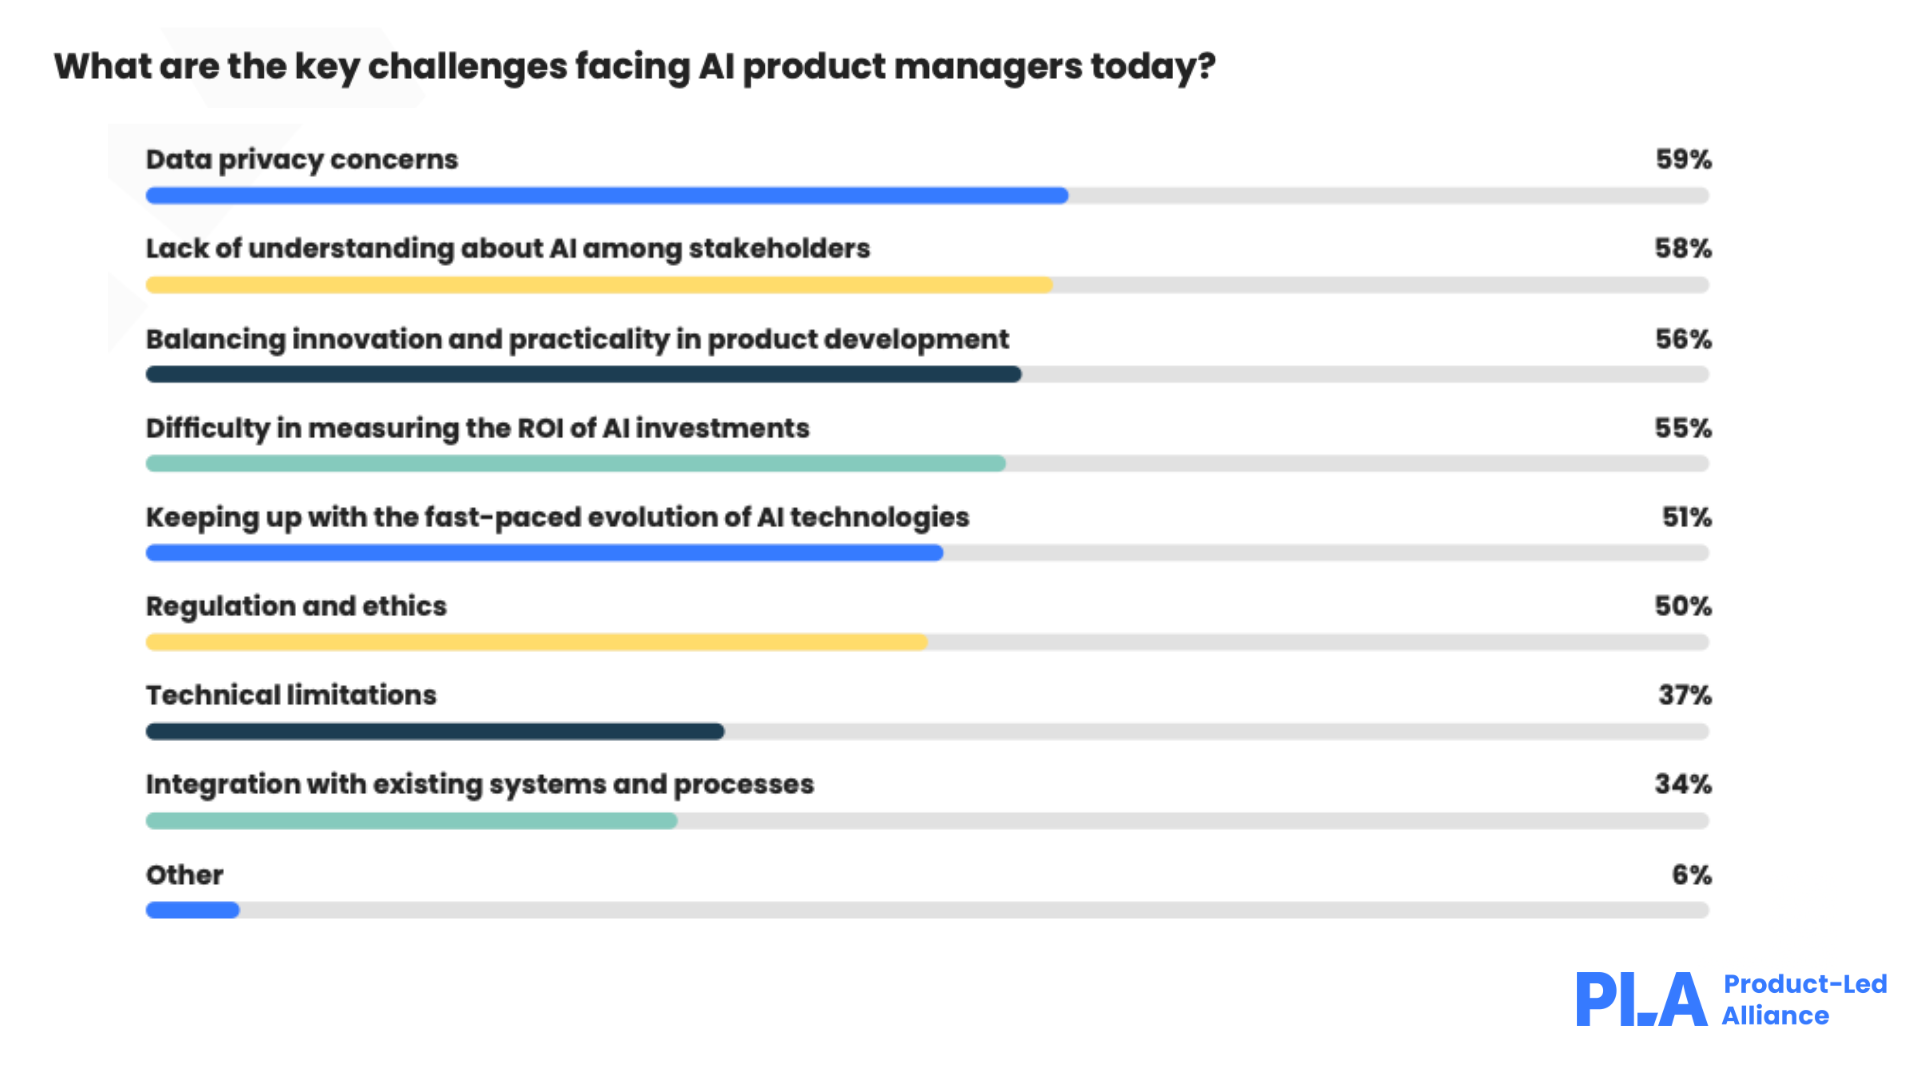 The biggest challenges for AI product managers